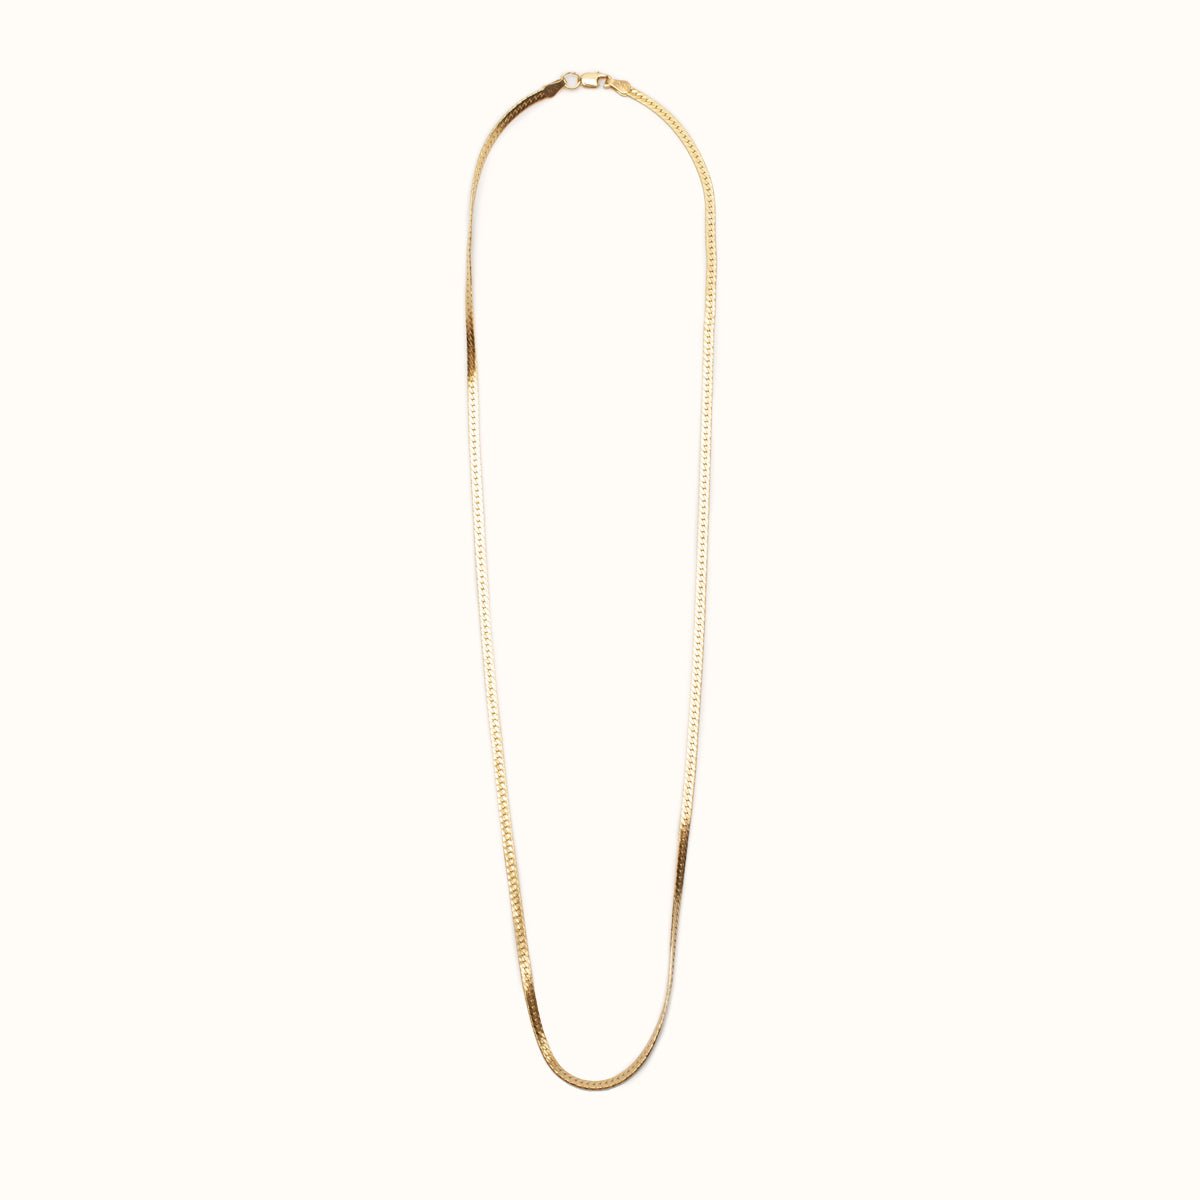 A classic gold tone herringbone necklace. The Bold Herra Necklace is handcrafted by Hello Adorn in Eau Claire, WI.